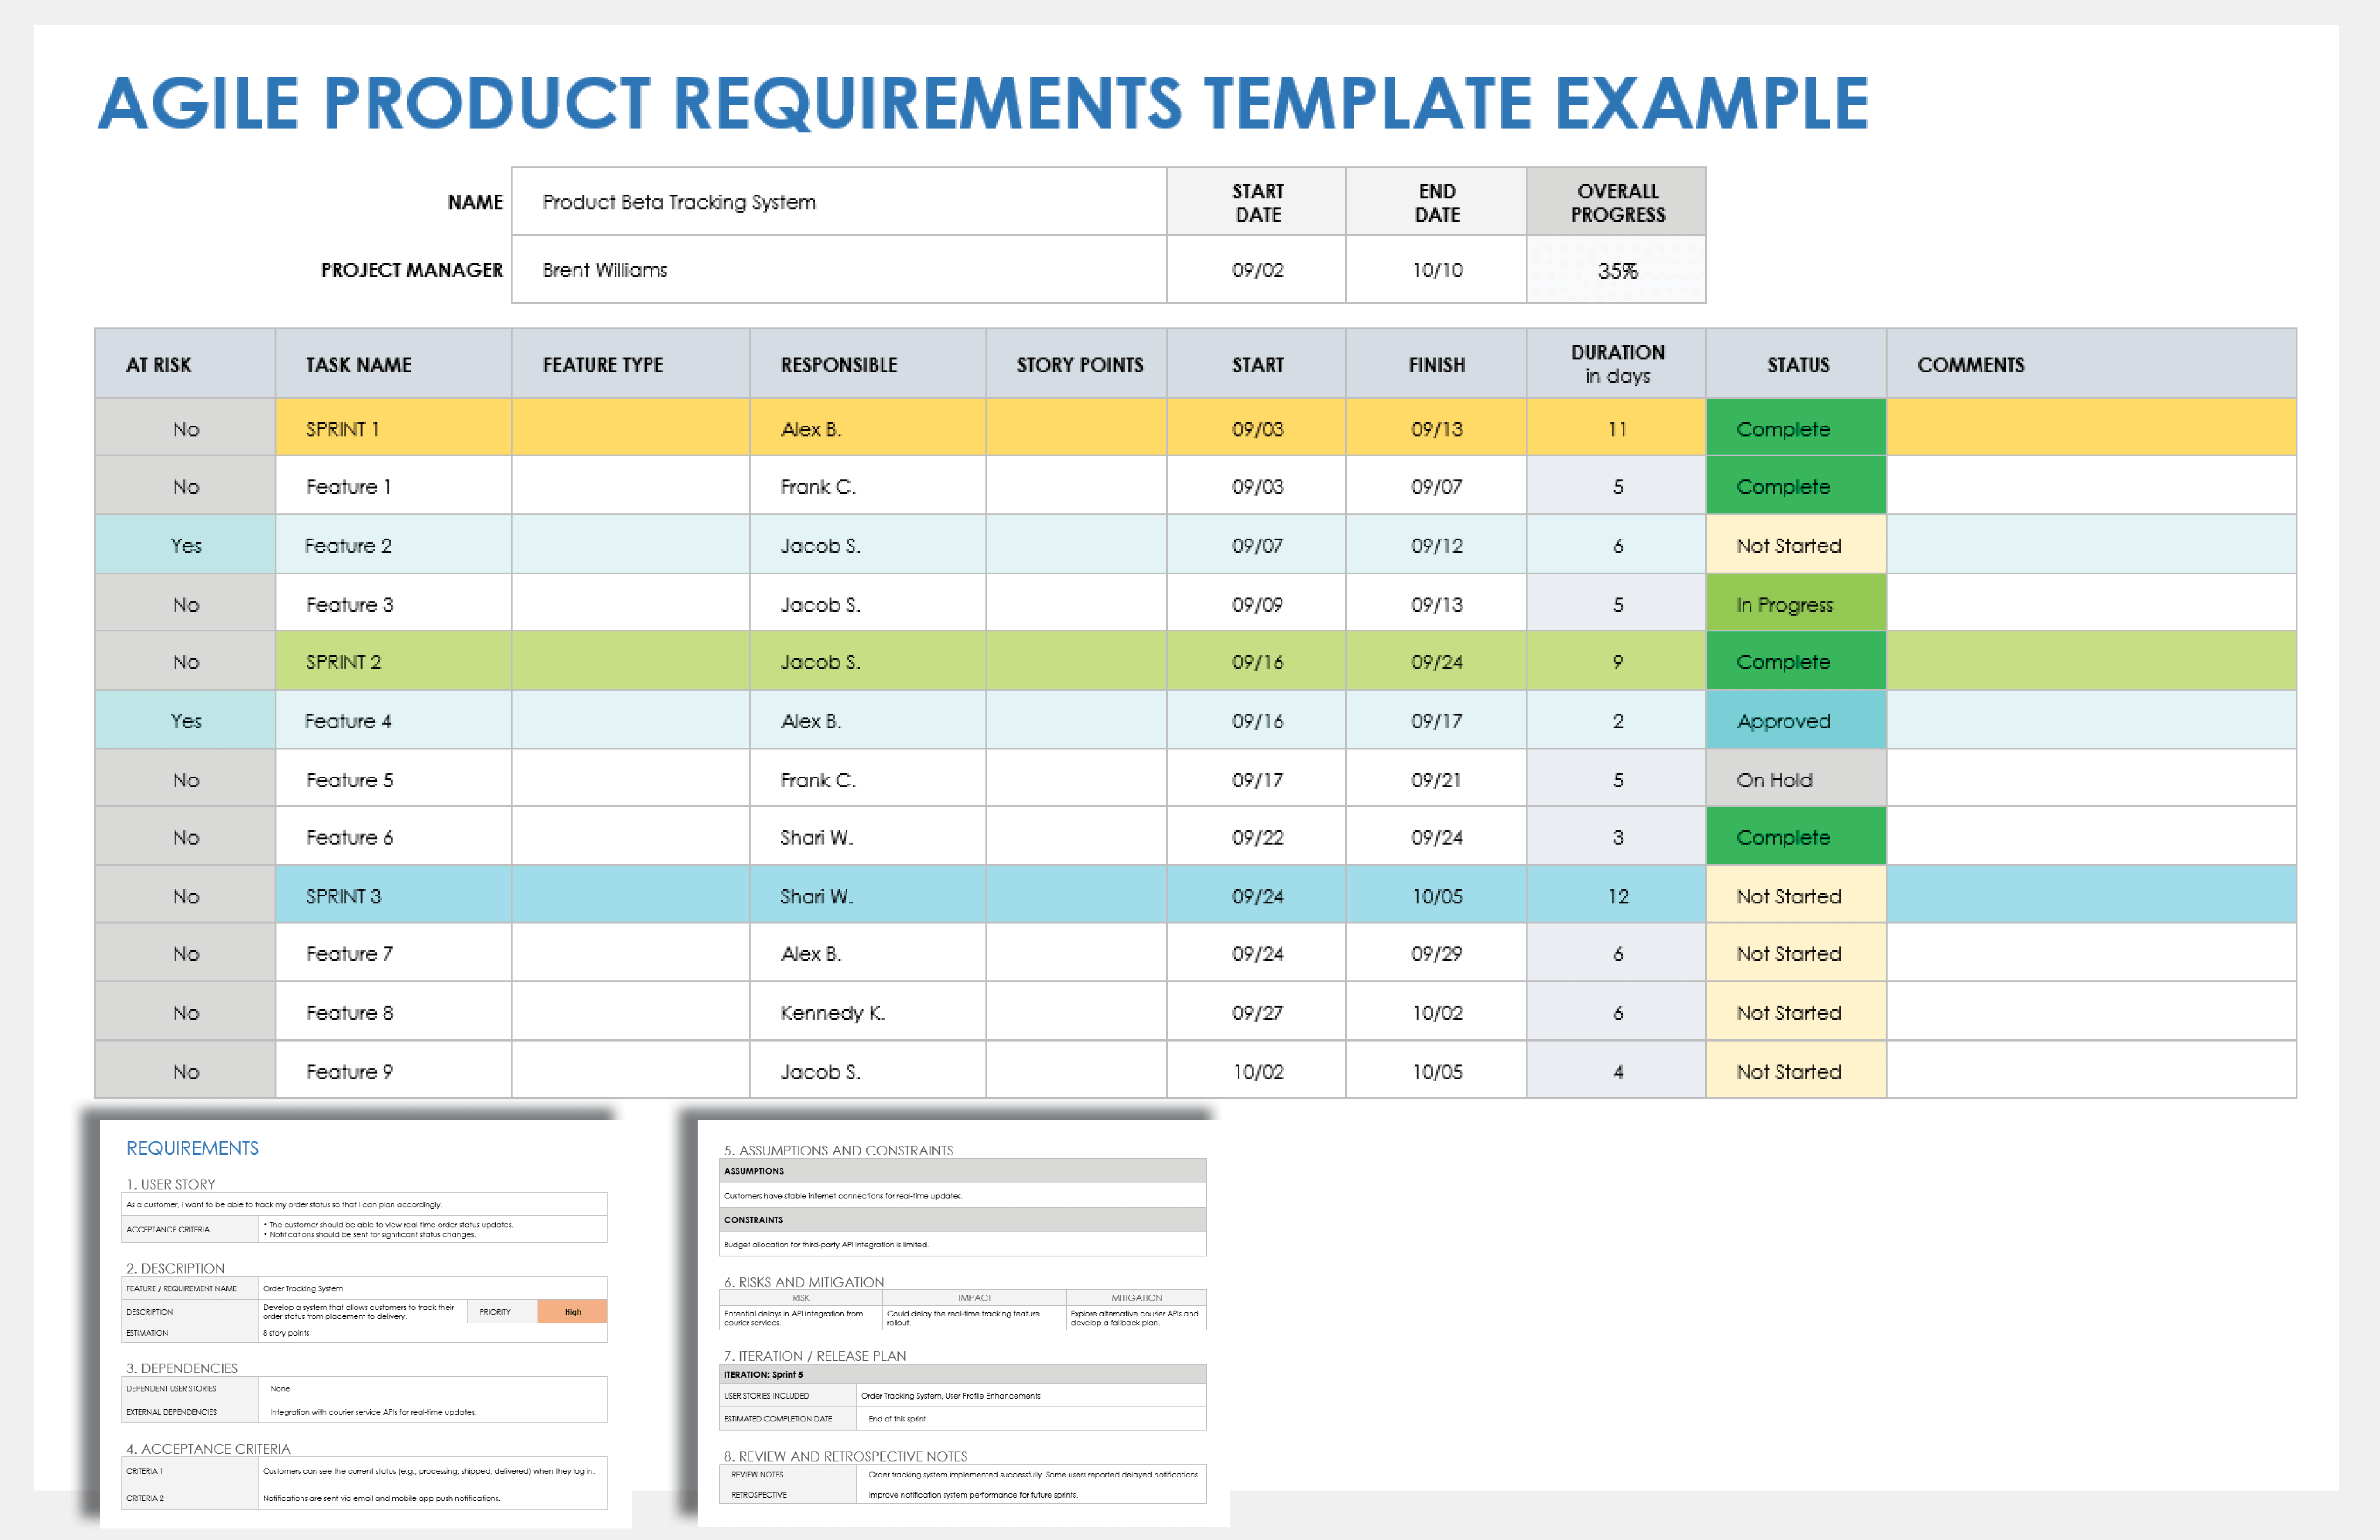 Agile Product Requirement Example Template